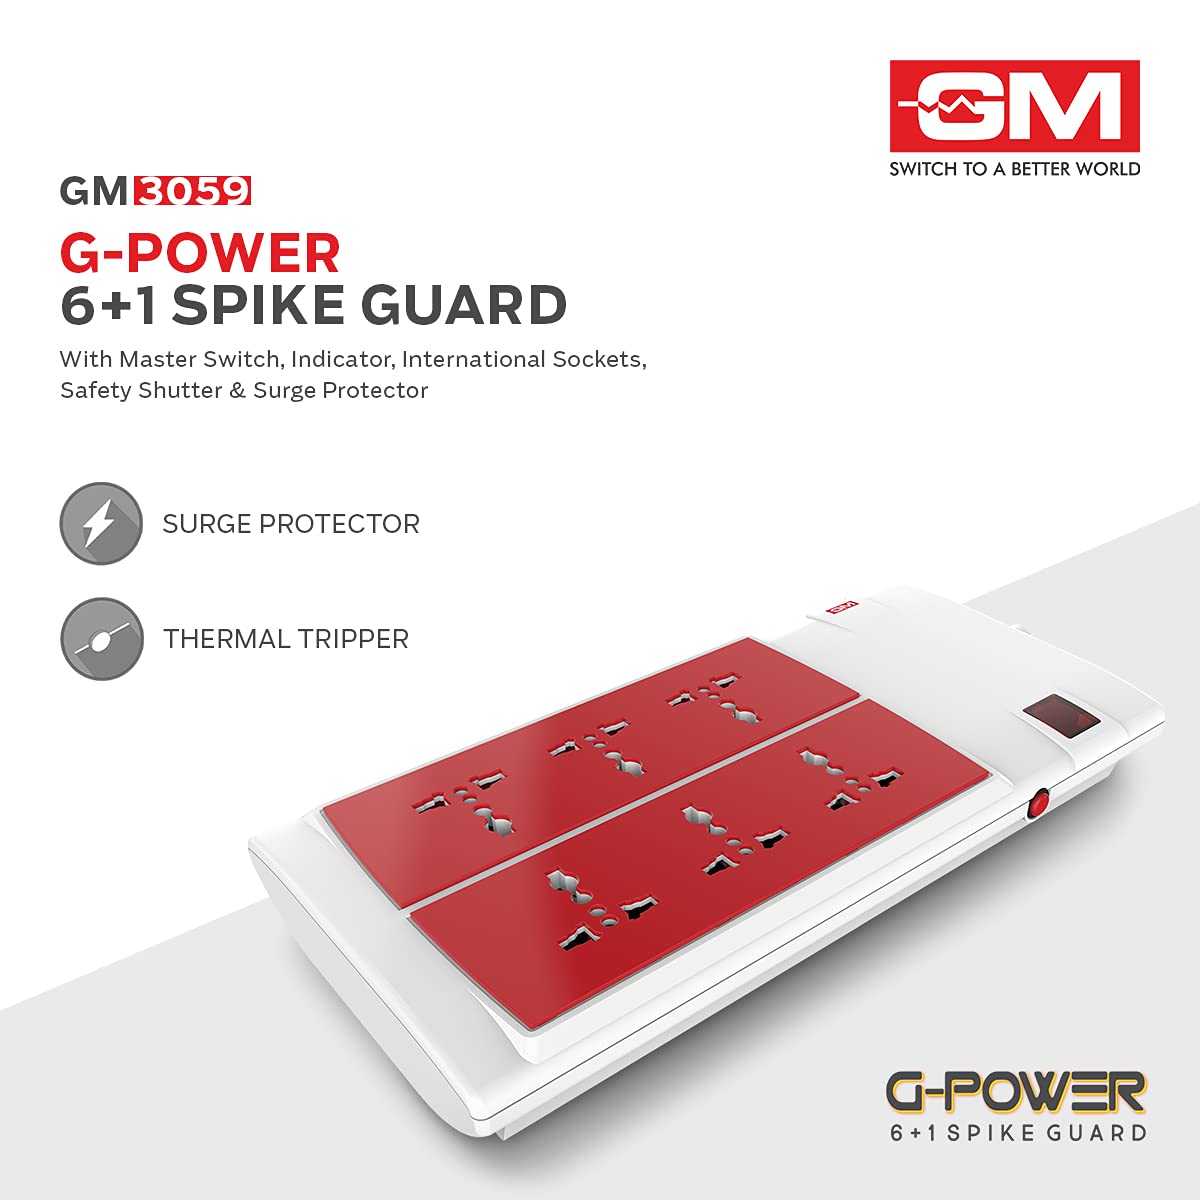 GM 3059 G-Power 6+1 Spike Adaptor with Master Switch, Indicator